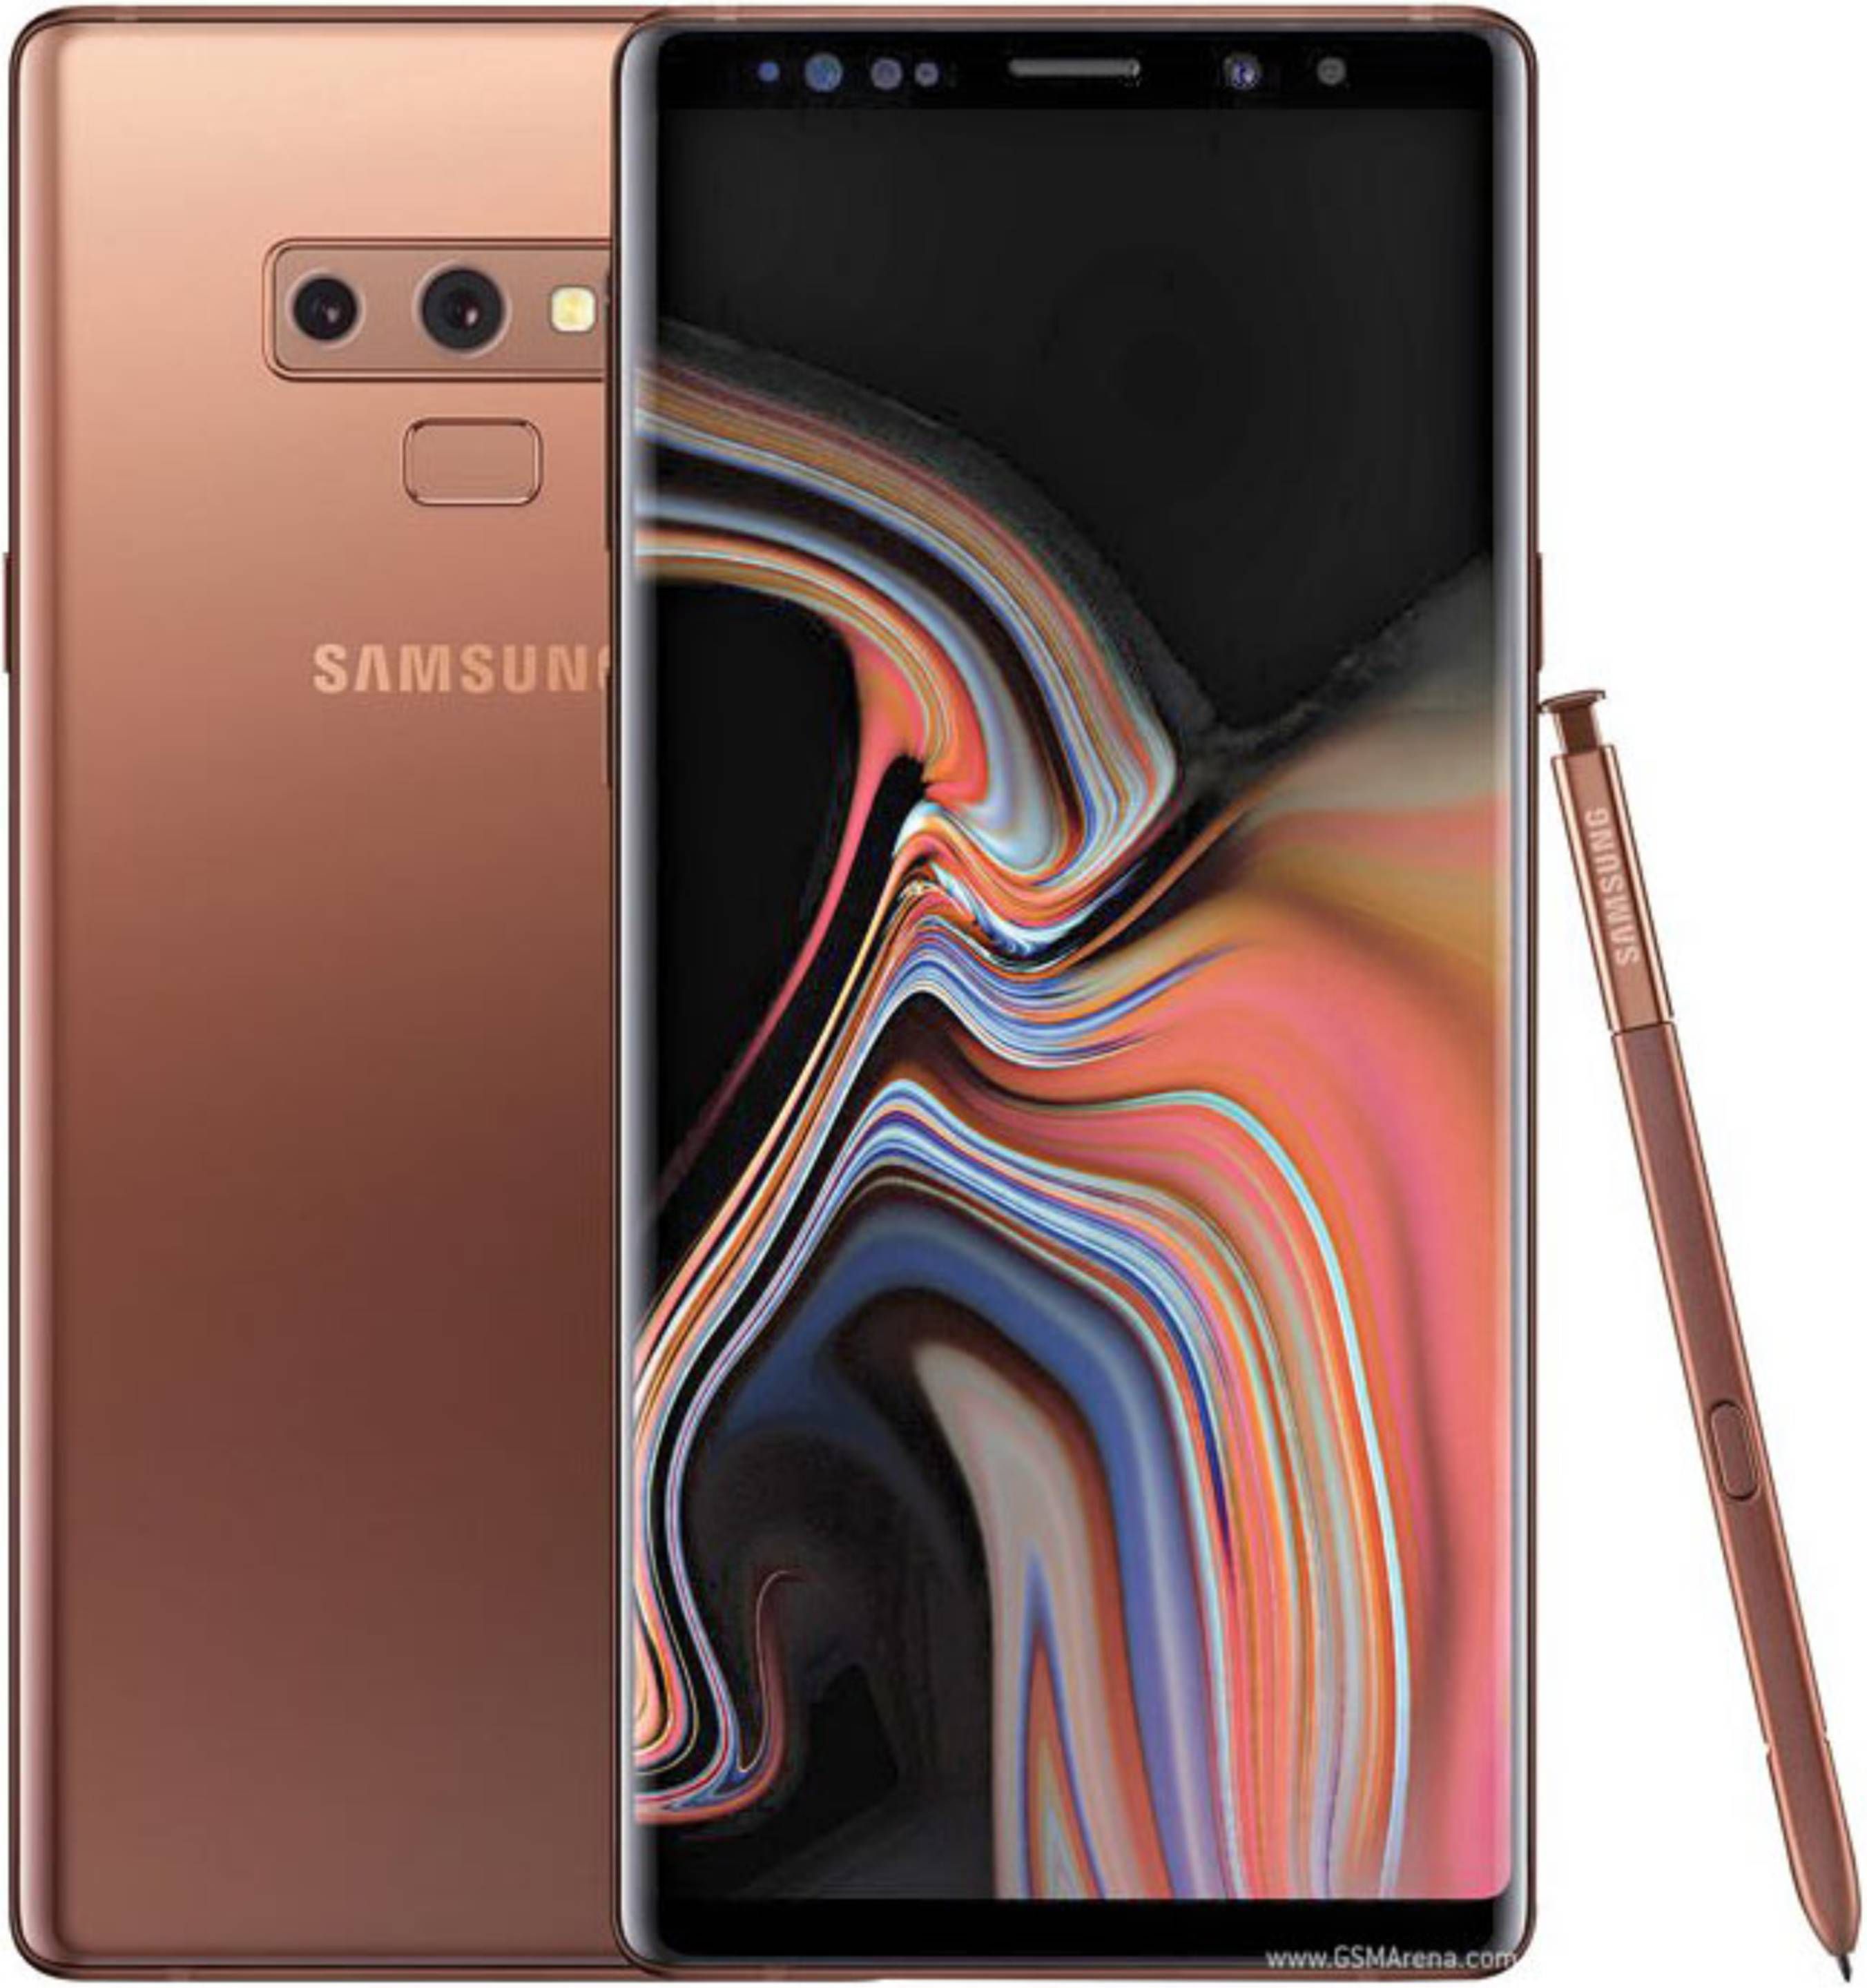 What is Samsung Galaxy Note 9 Screen Replacement Cost in Kenya?